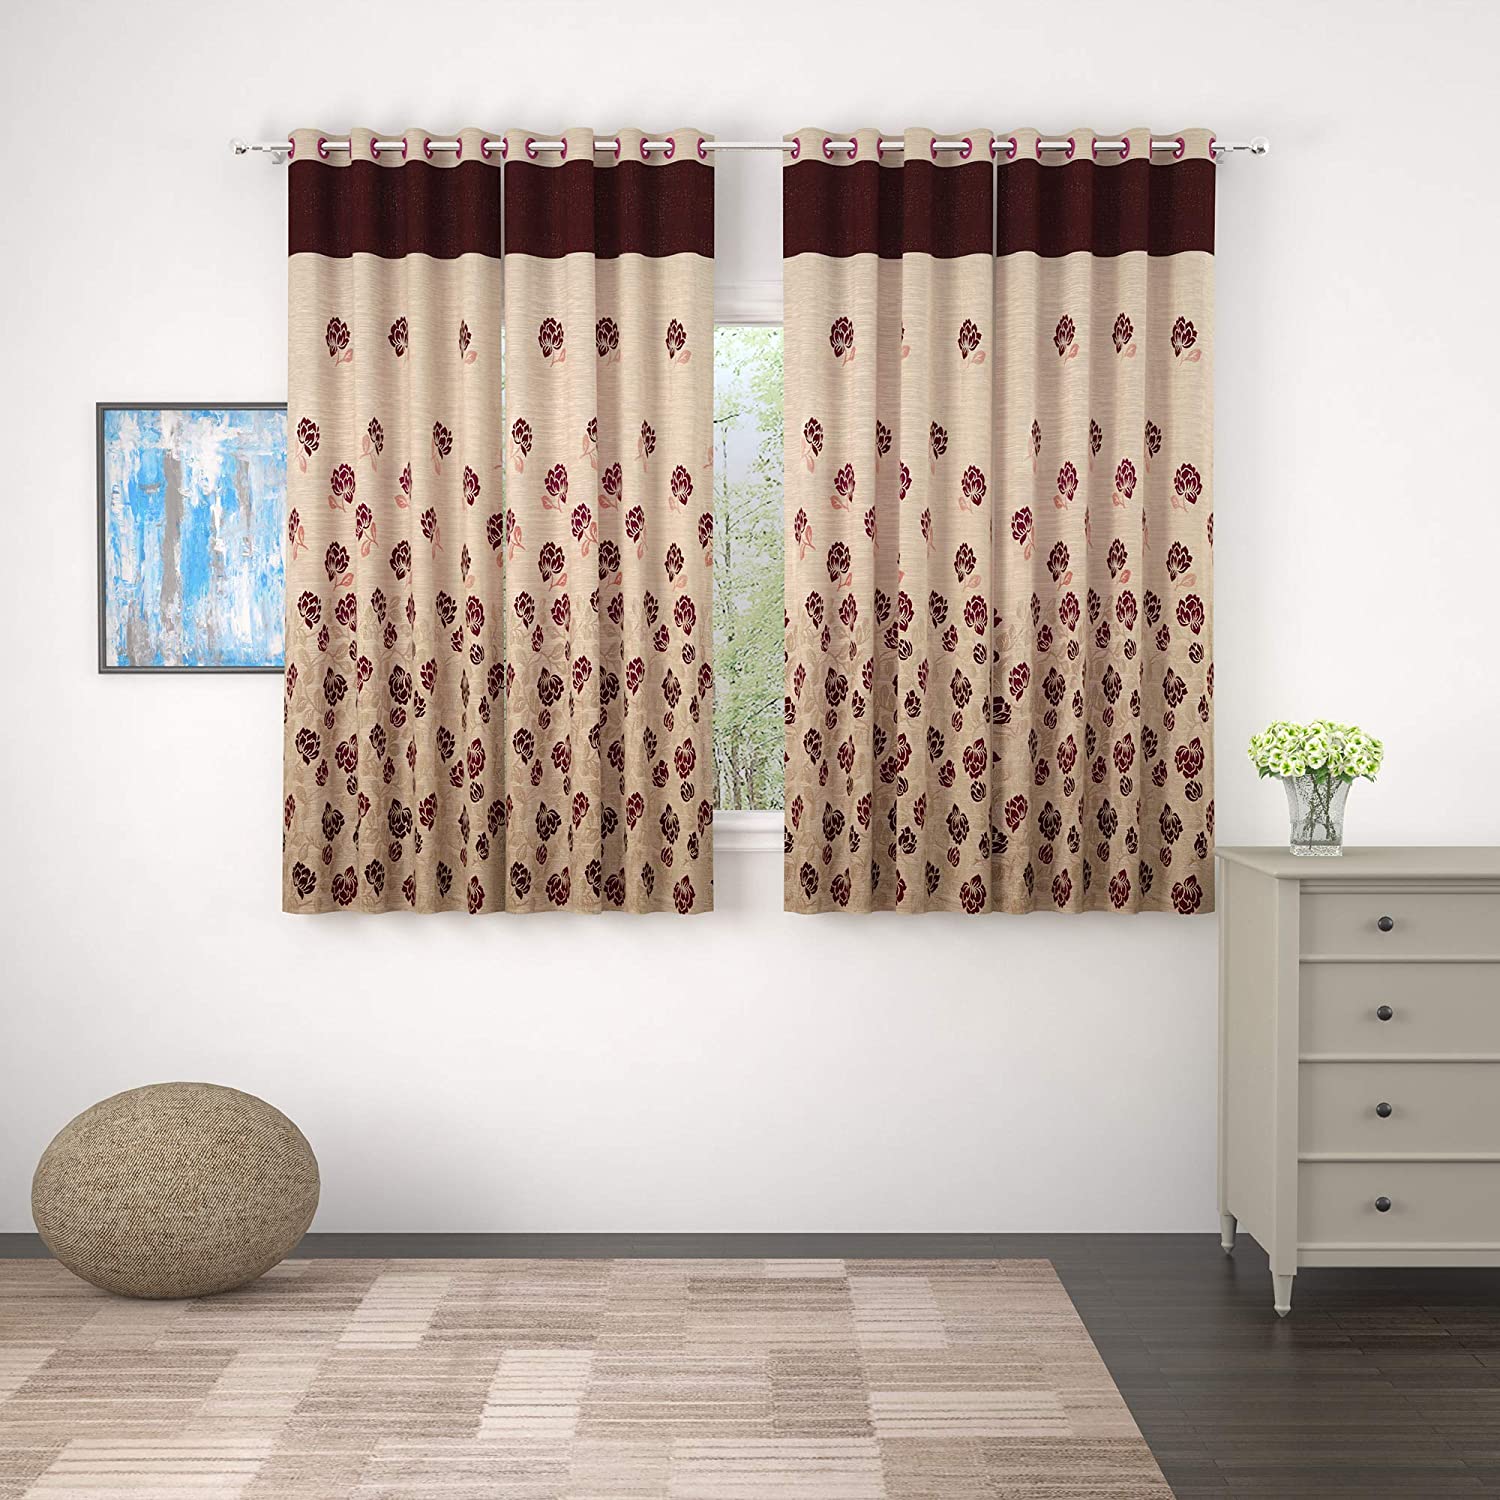 STHL Marble Pattern Luxury Velvet Curtain Pair Fully Lined Ring Top Eyelet  with Tiebacks W 90 x L inches Cream : Amazon.co.uk: Home & Kitchen